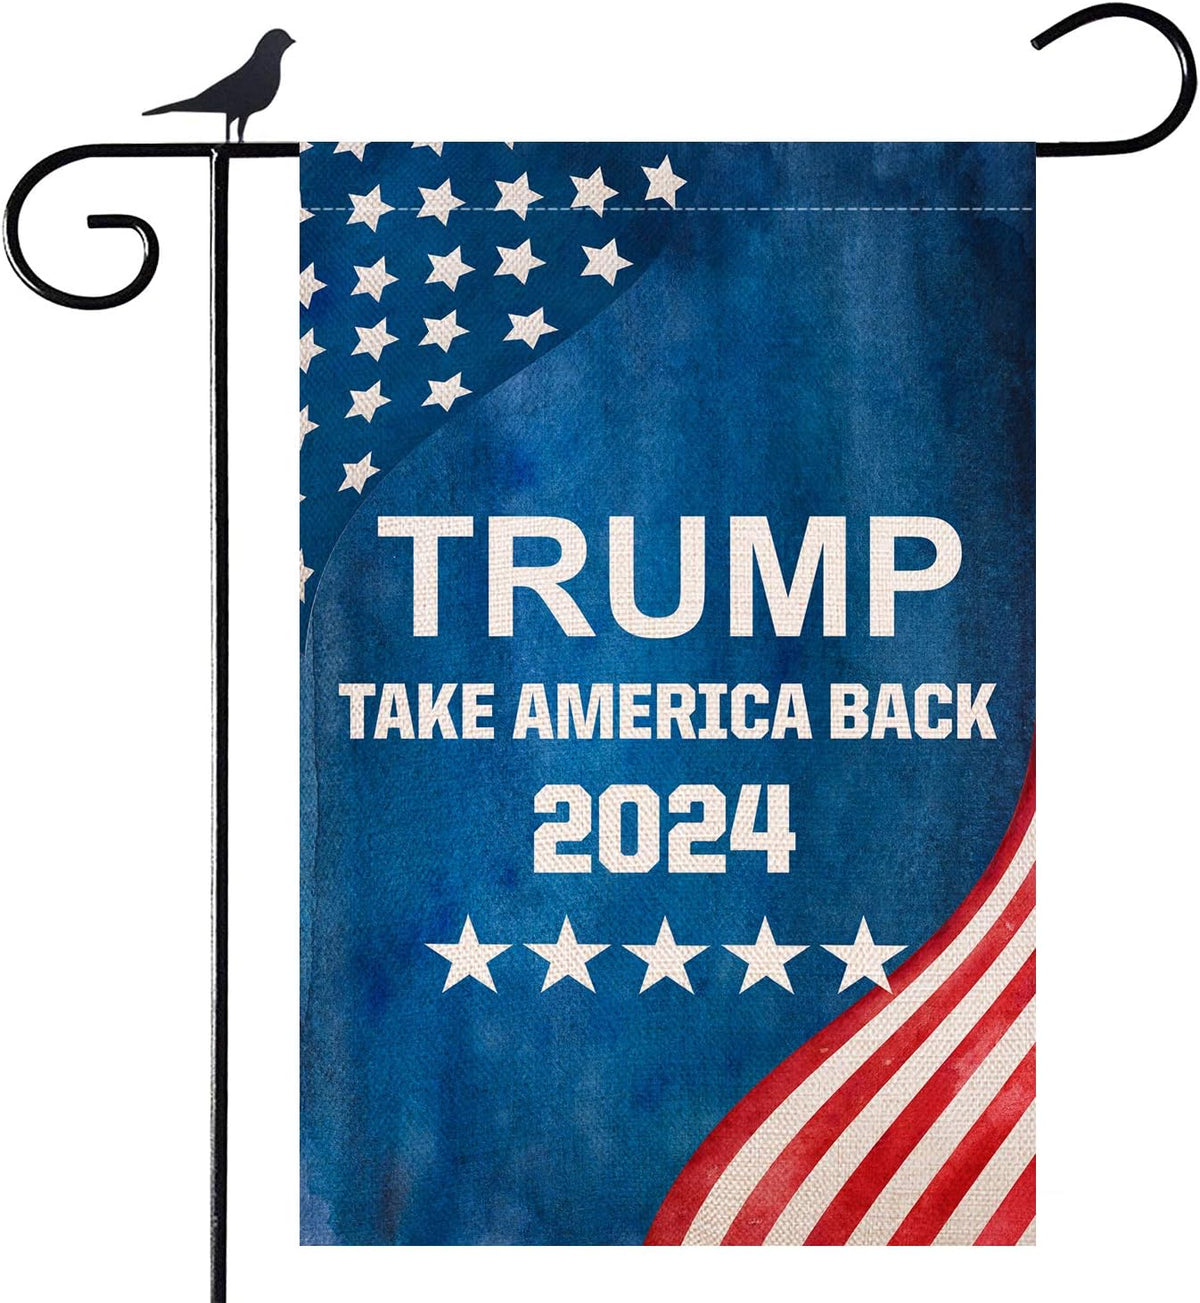 Shmbada Donald Trump 2024 Take America Back Double Sided Garden Flag Burlap Vertical Patriotic Yard Lawn Outdoor Decorative Small Flags, 12.5 x 18.5 Inch